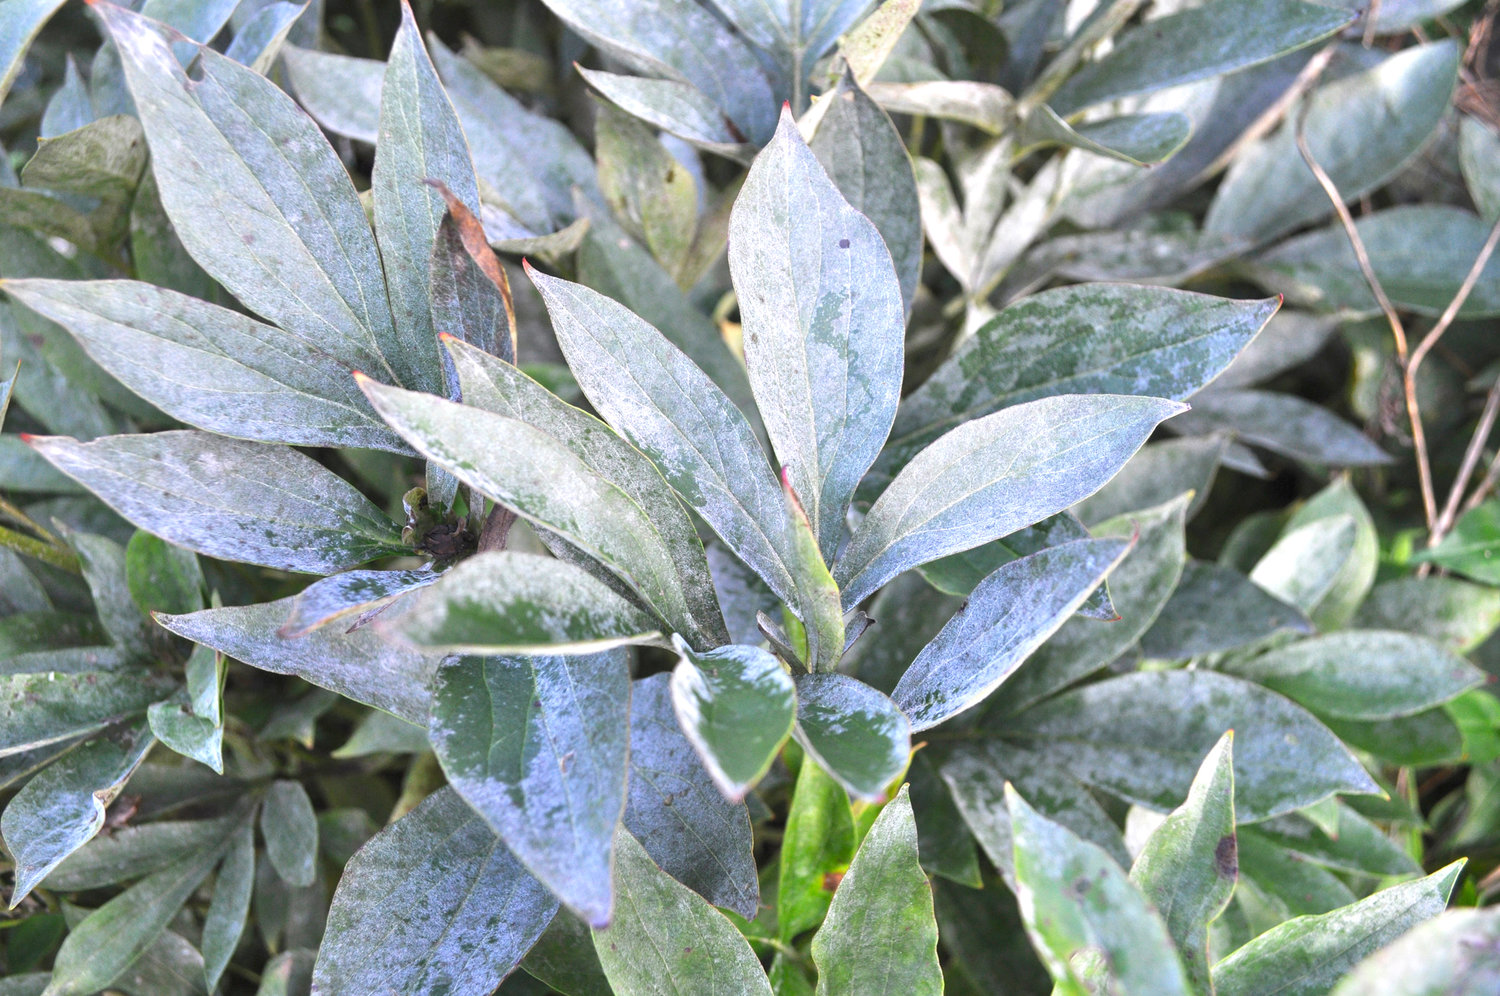 Powdery mildew on a peony plant is shown in New Paltz. The powdery white dusting is a sign of disease.